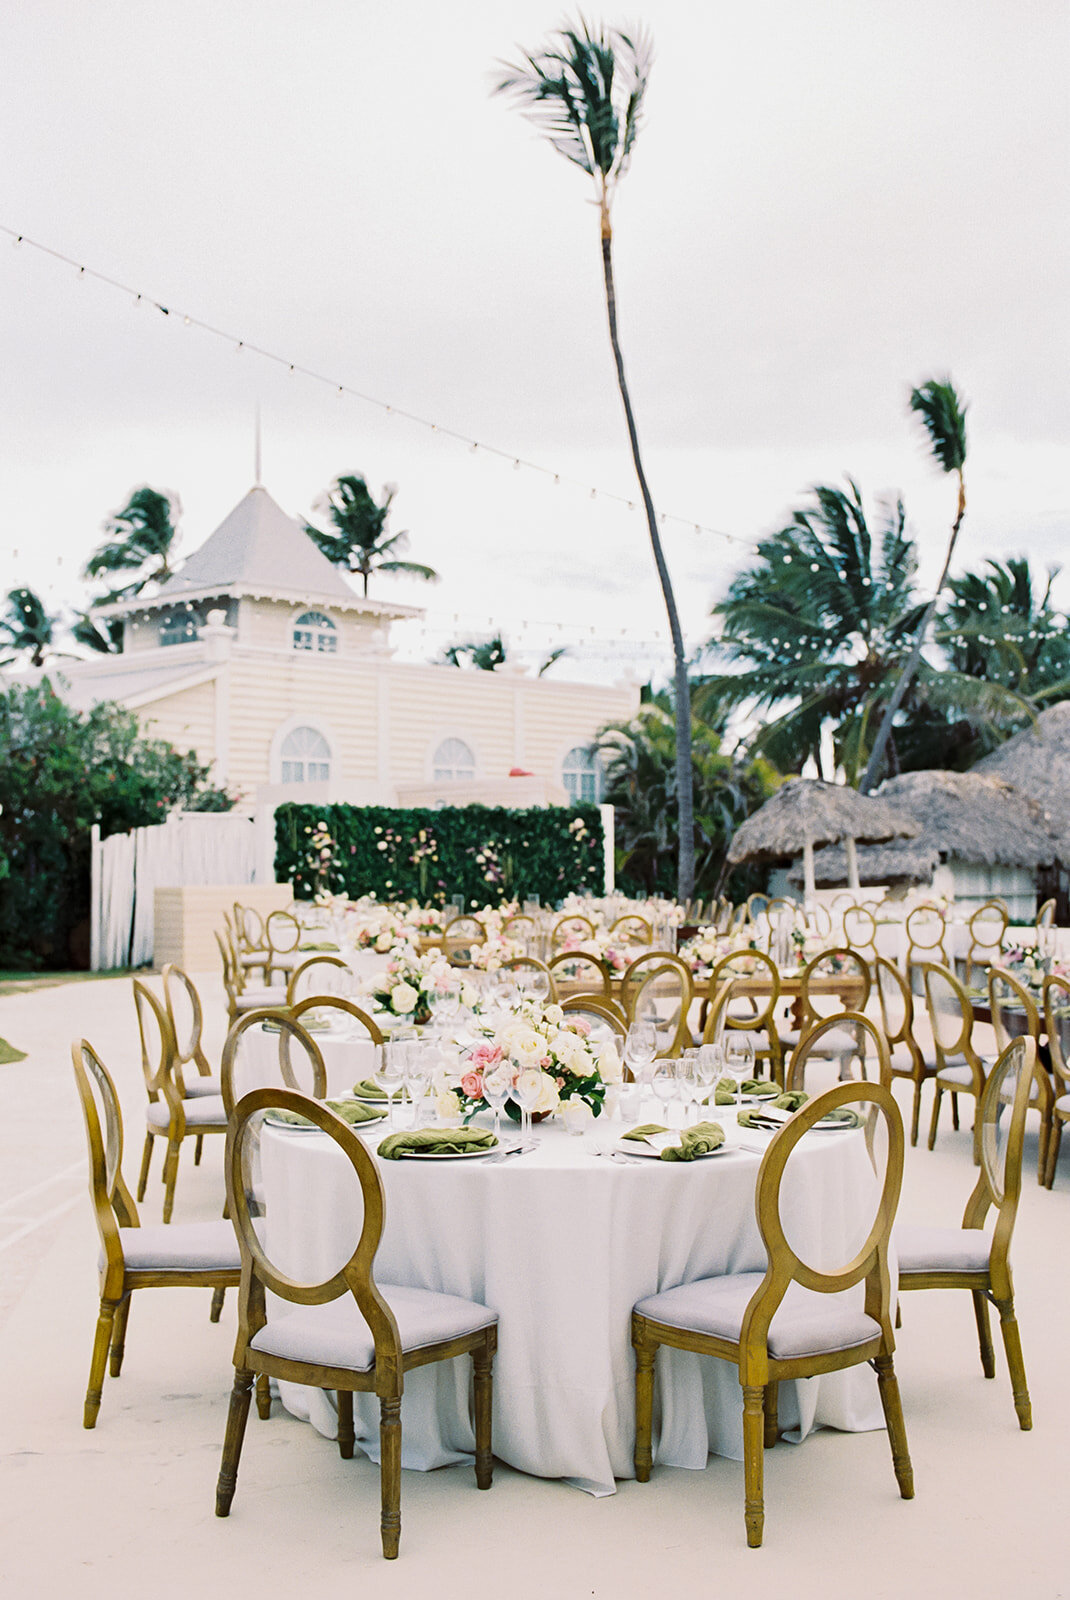 Punta Cana Wedding by Claire Duran